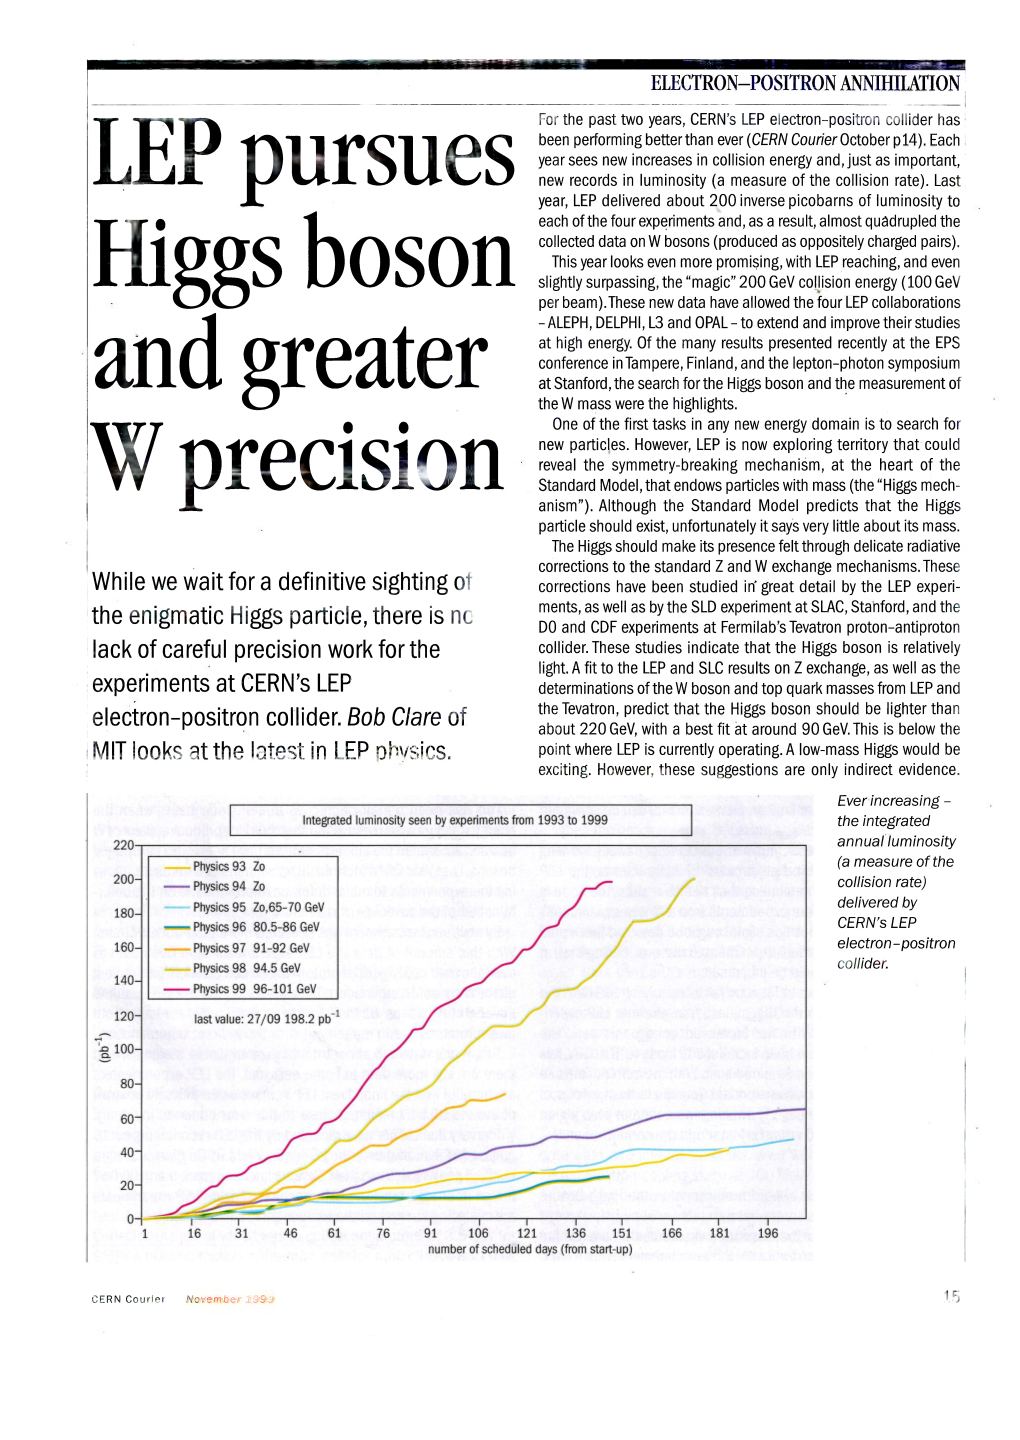 LEP Pursues Higgs Boson and Greater W Precision